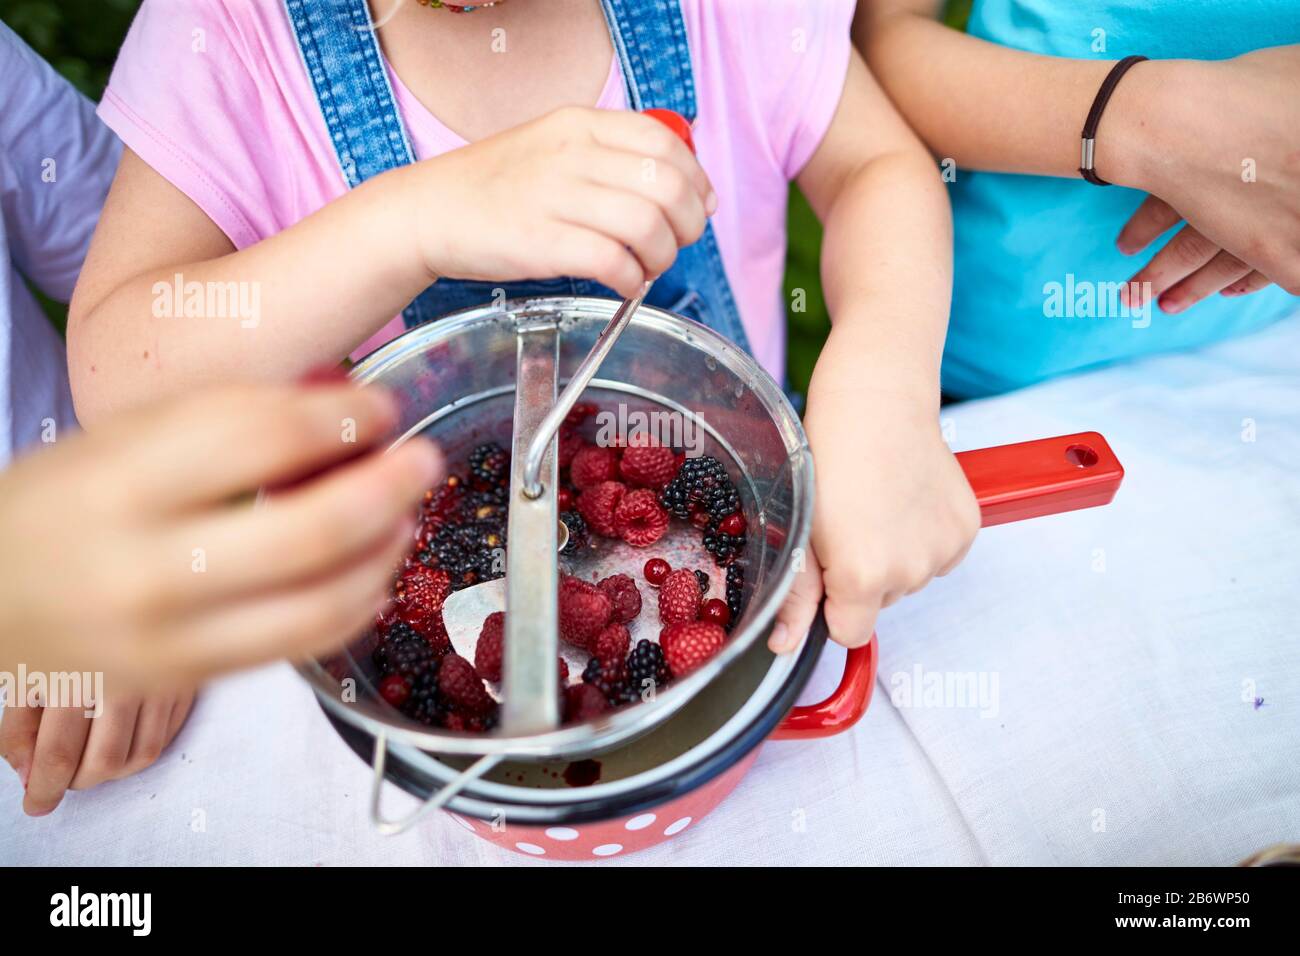 Children investigating food. Series: cooking jam. Mashing and sieving berries in a food mill. Learning according to the Reggio Pedagogy principle, playful understanding and discovery. Germany Stock Photo